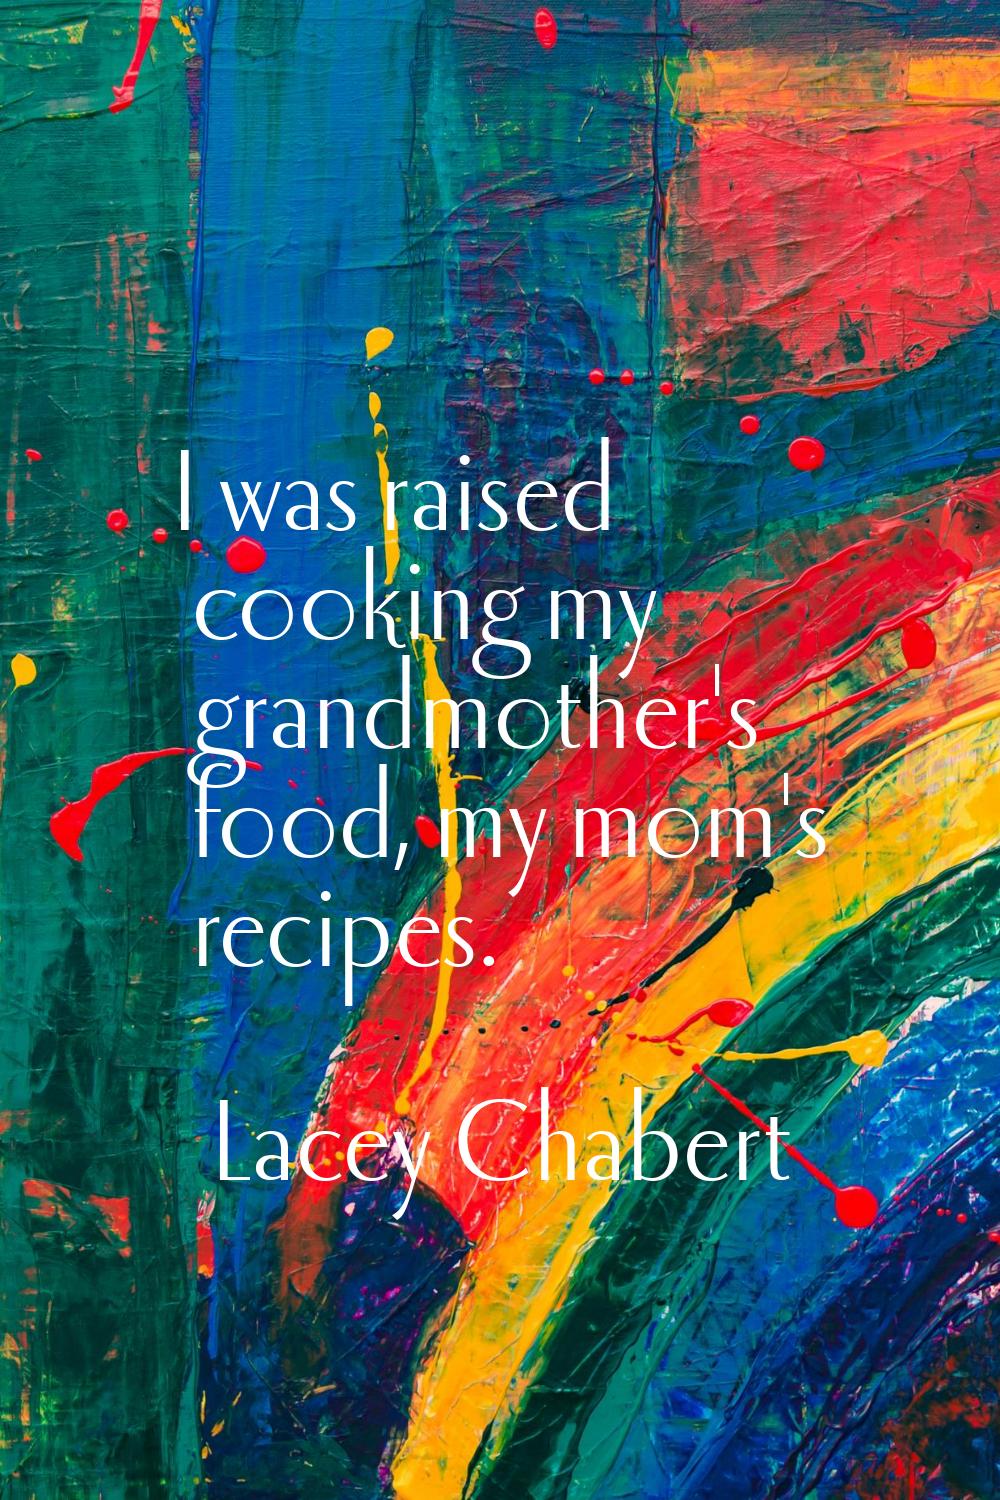 I was raised cooking my grandmother's food, my mom's recipes.